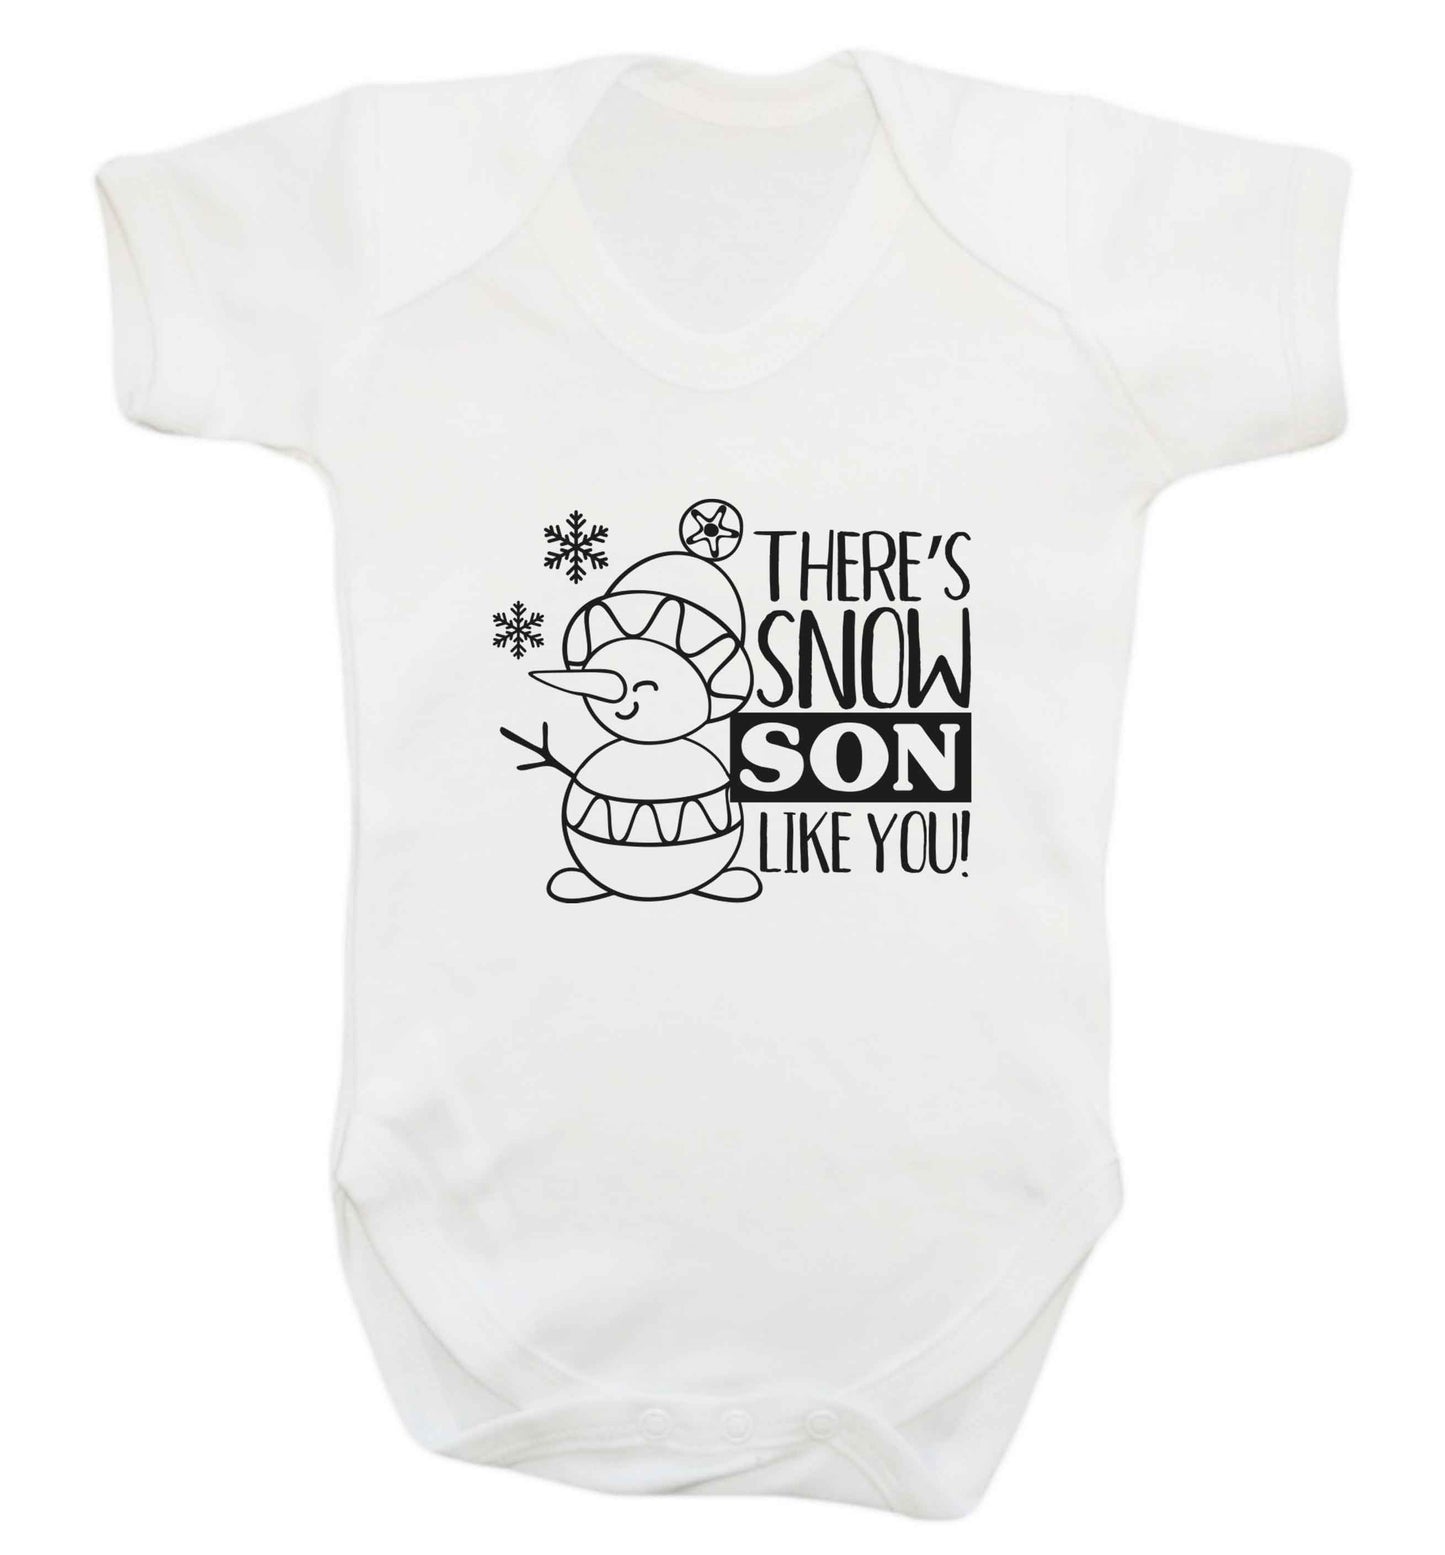 There's snow son like you baby vest white 18-24 months